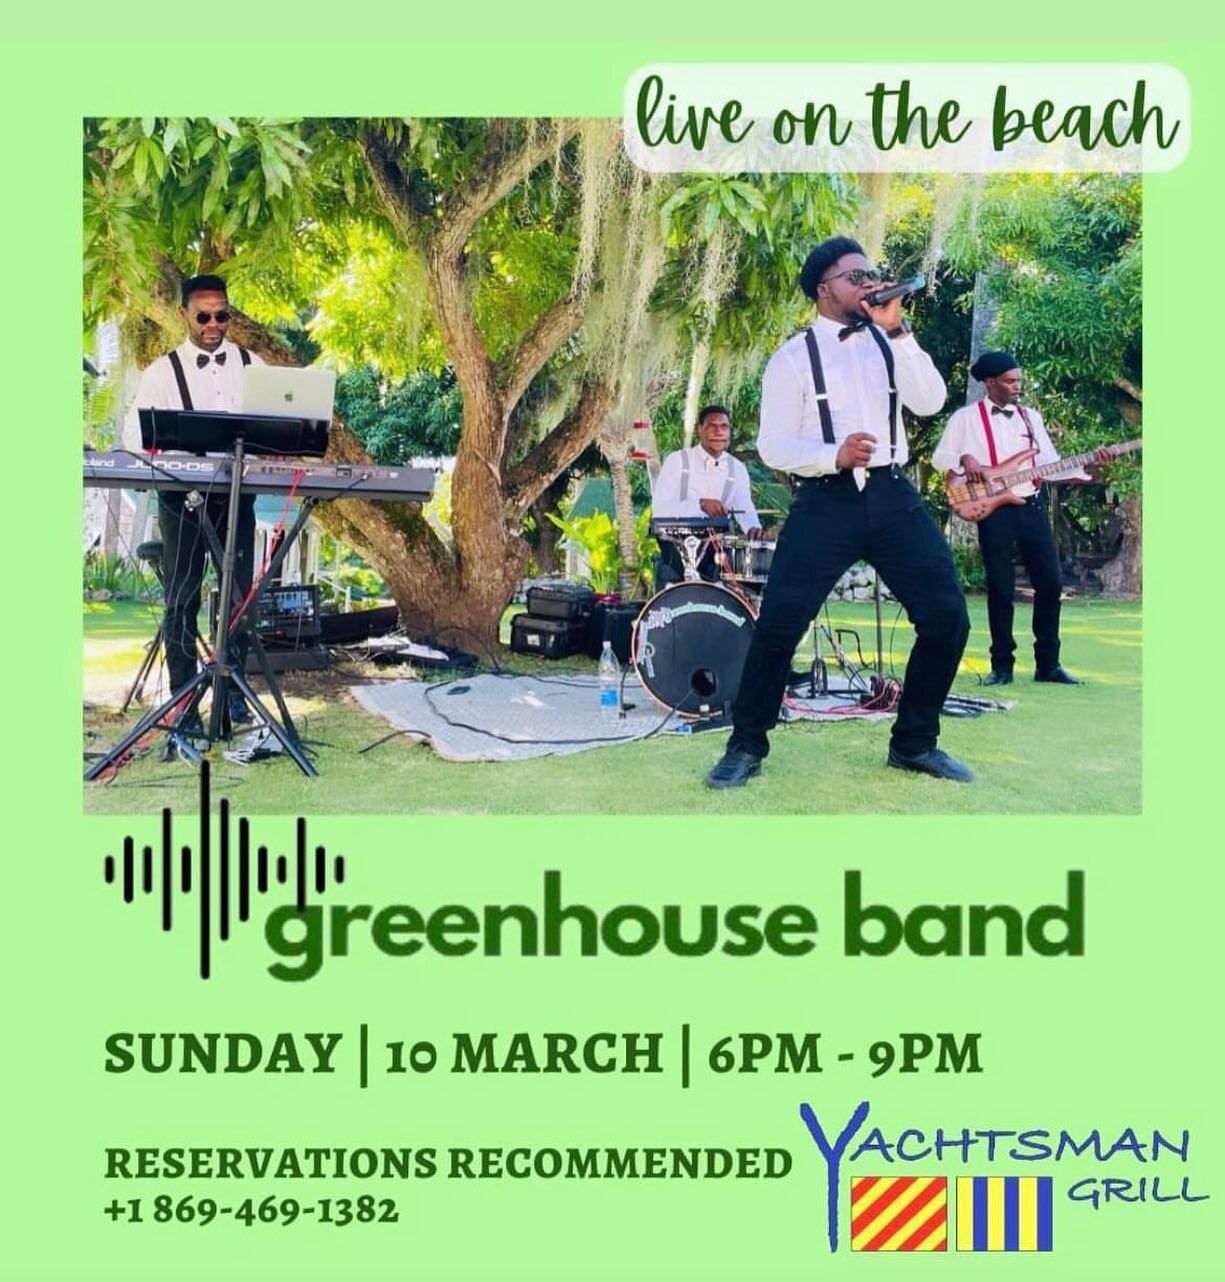 Save the date, make your reservations, see you at Yachtsmans on the 10th! 🎶🎼💃🕺